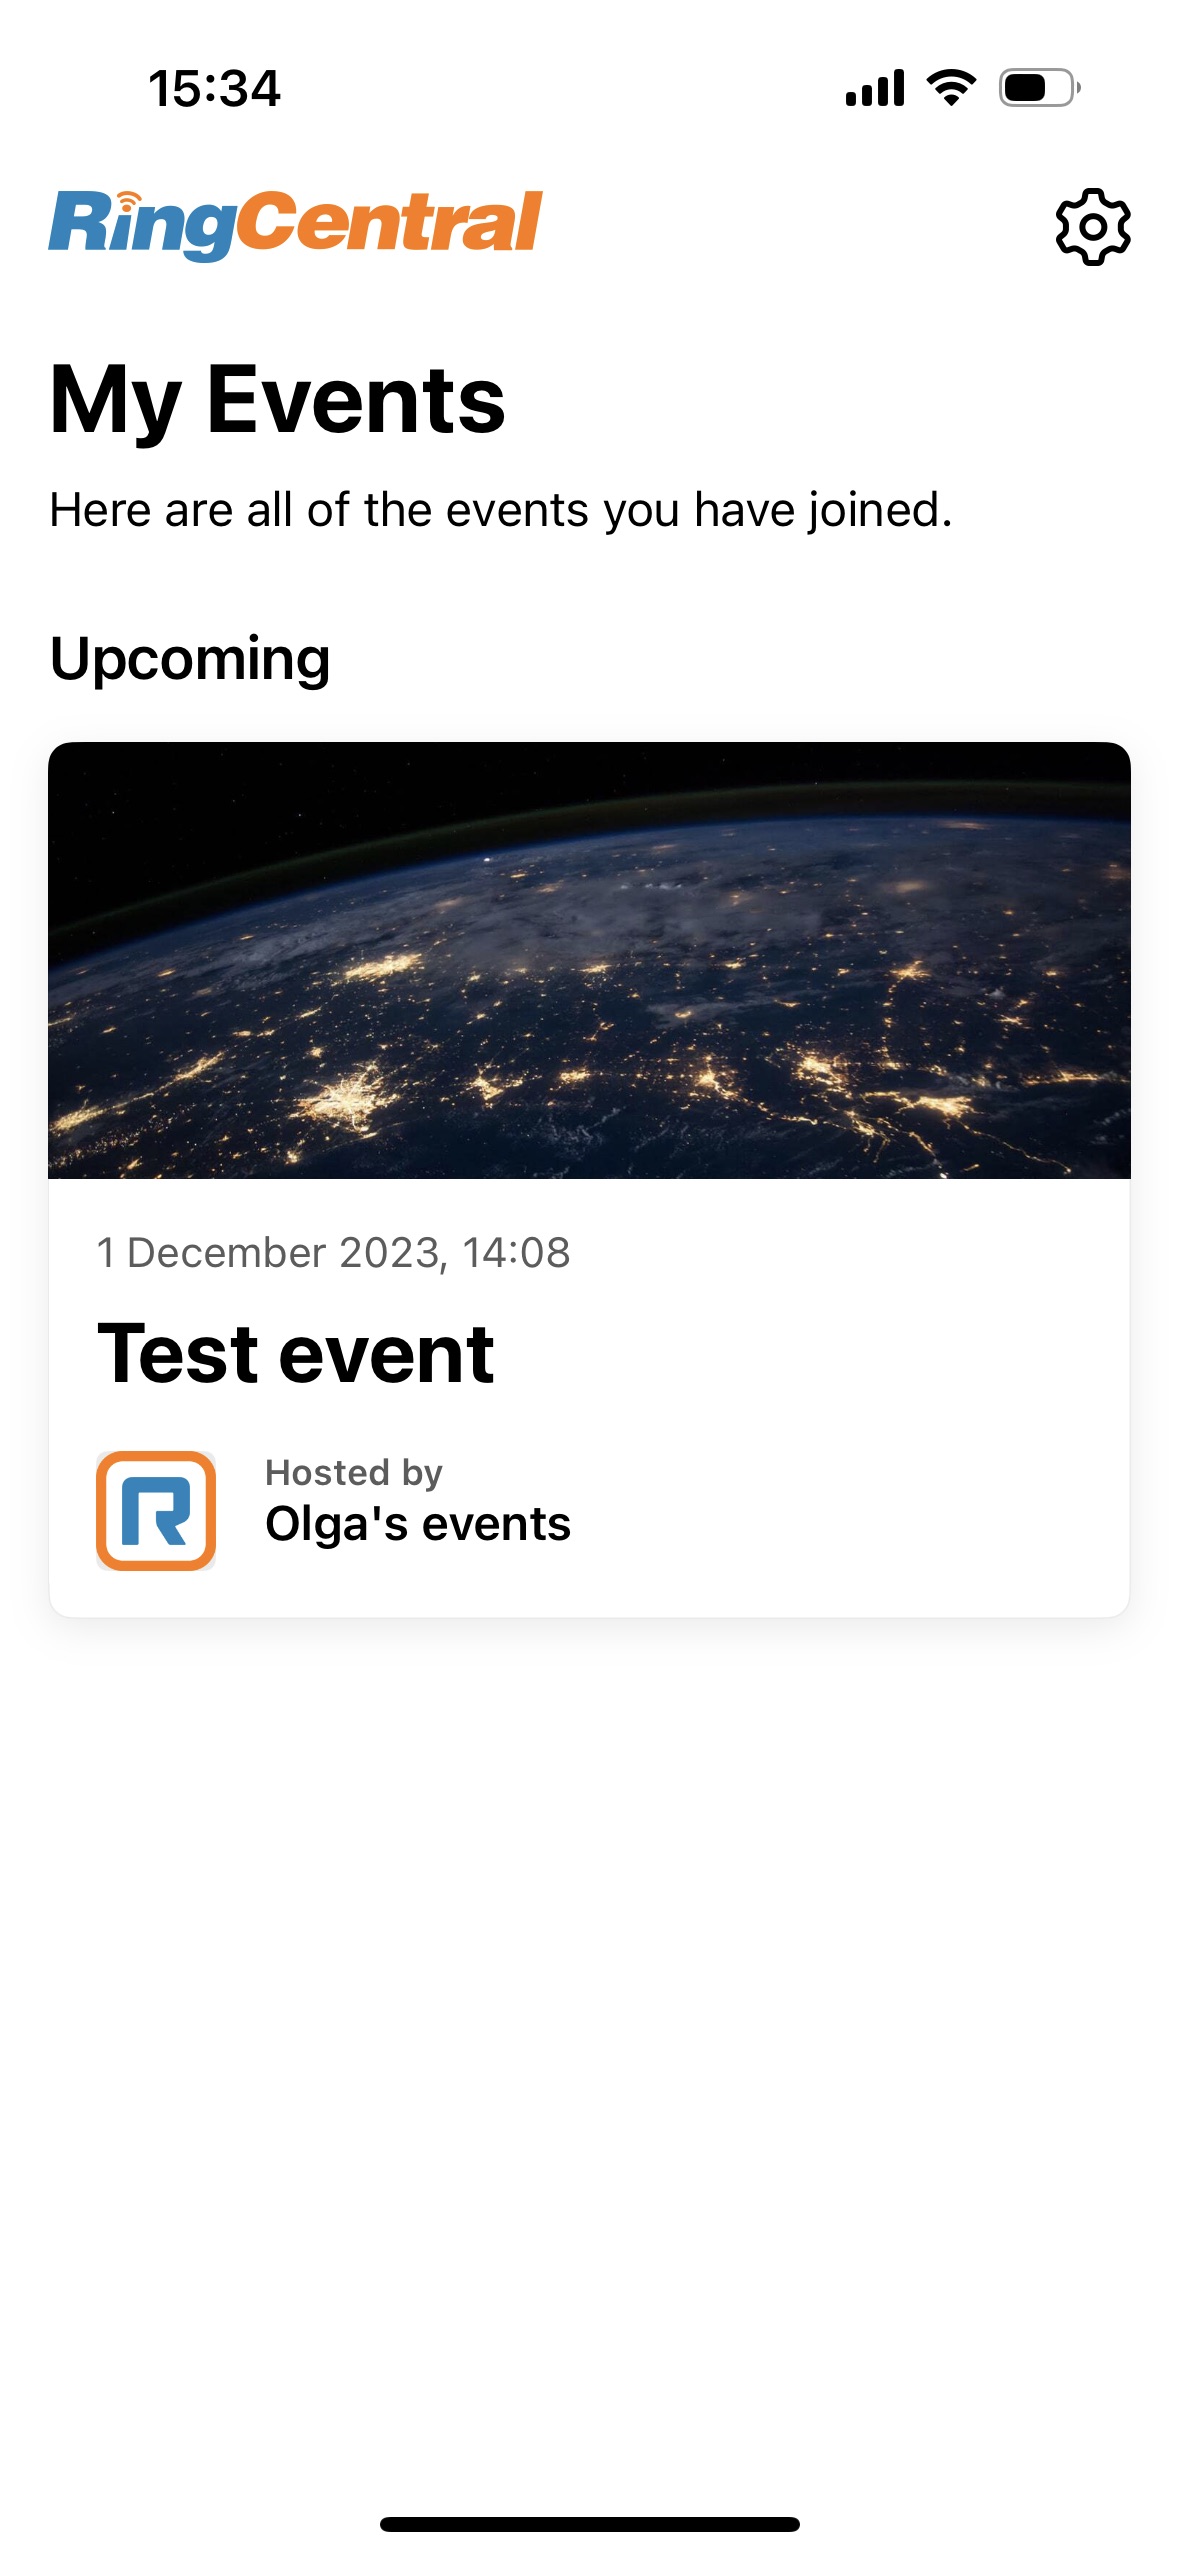 Typeform - RingCentral Events App Store